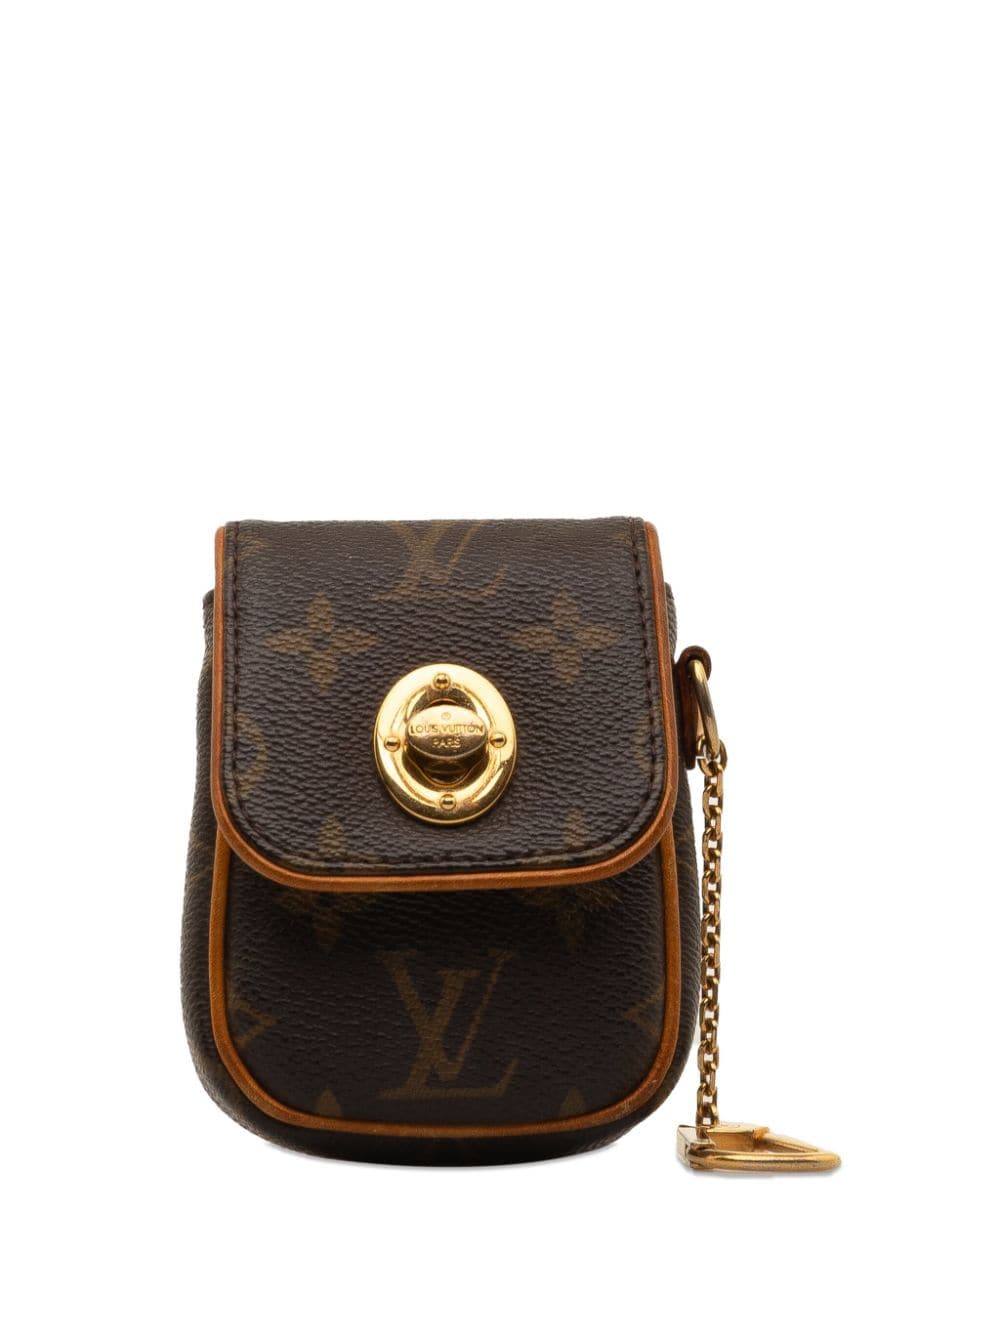 Pre-owned Louis Vuitton 2006 Tulum Pochette Wallet In Brown